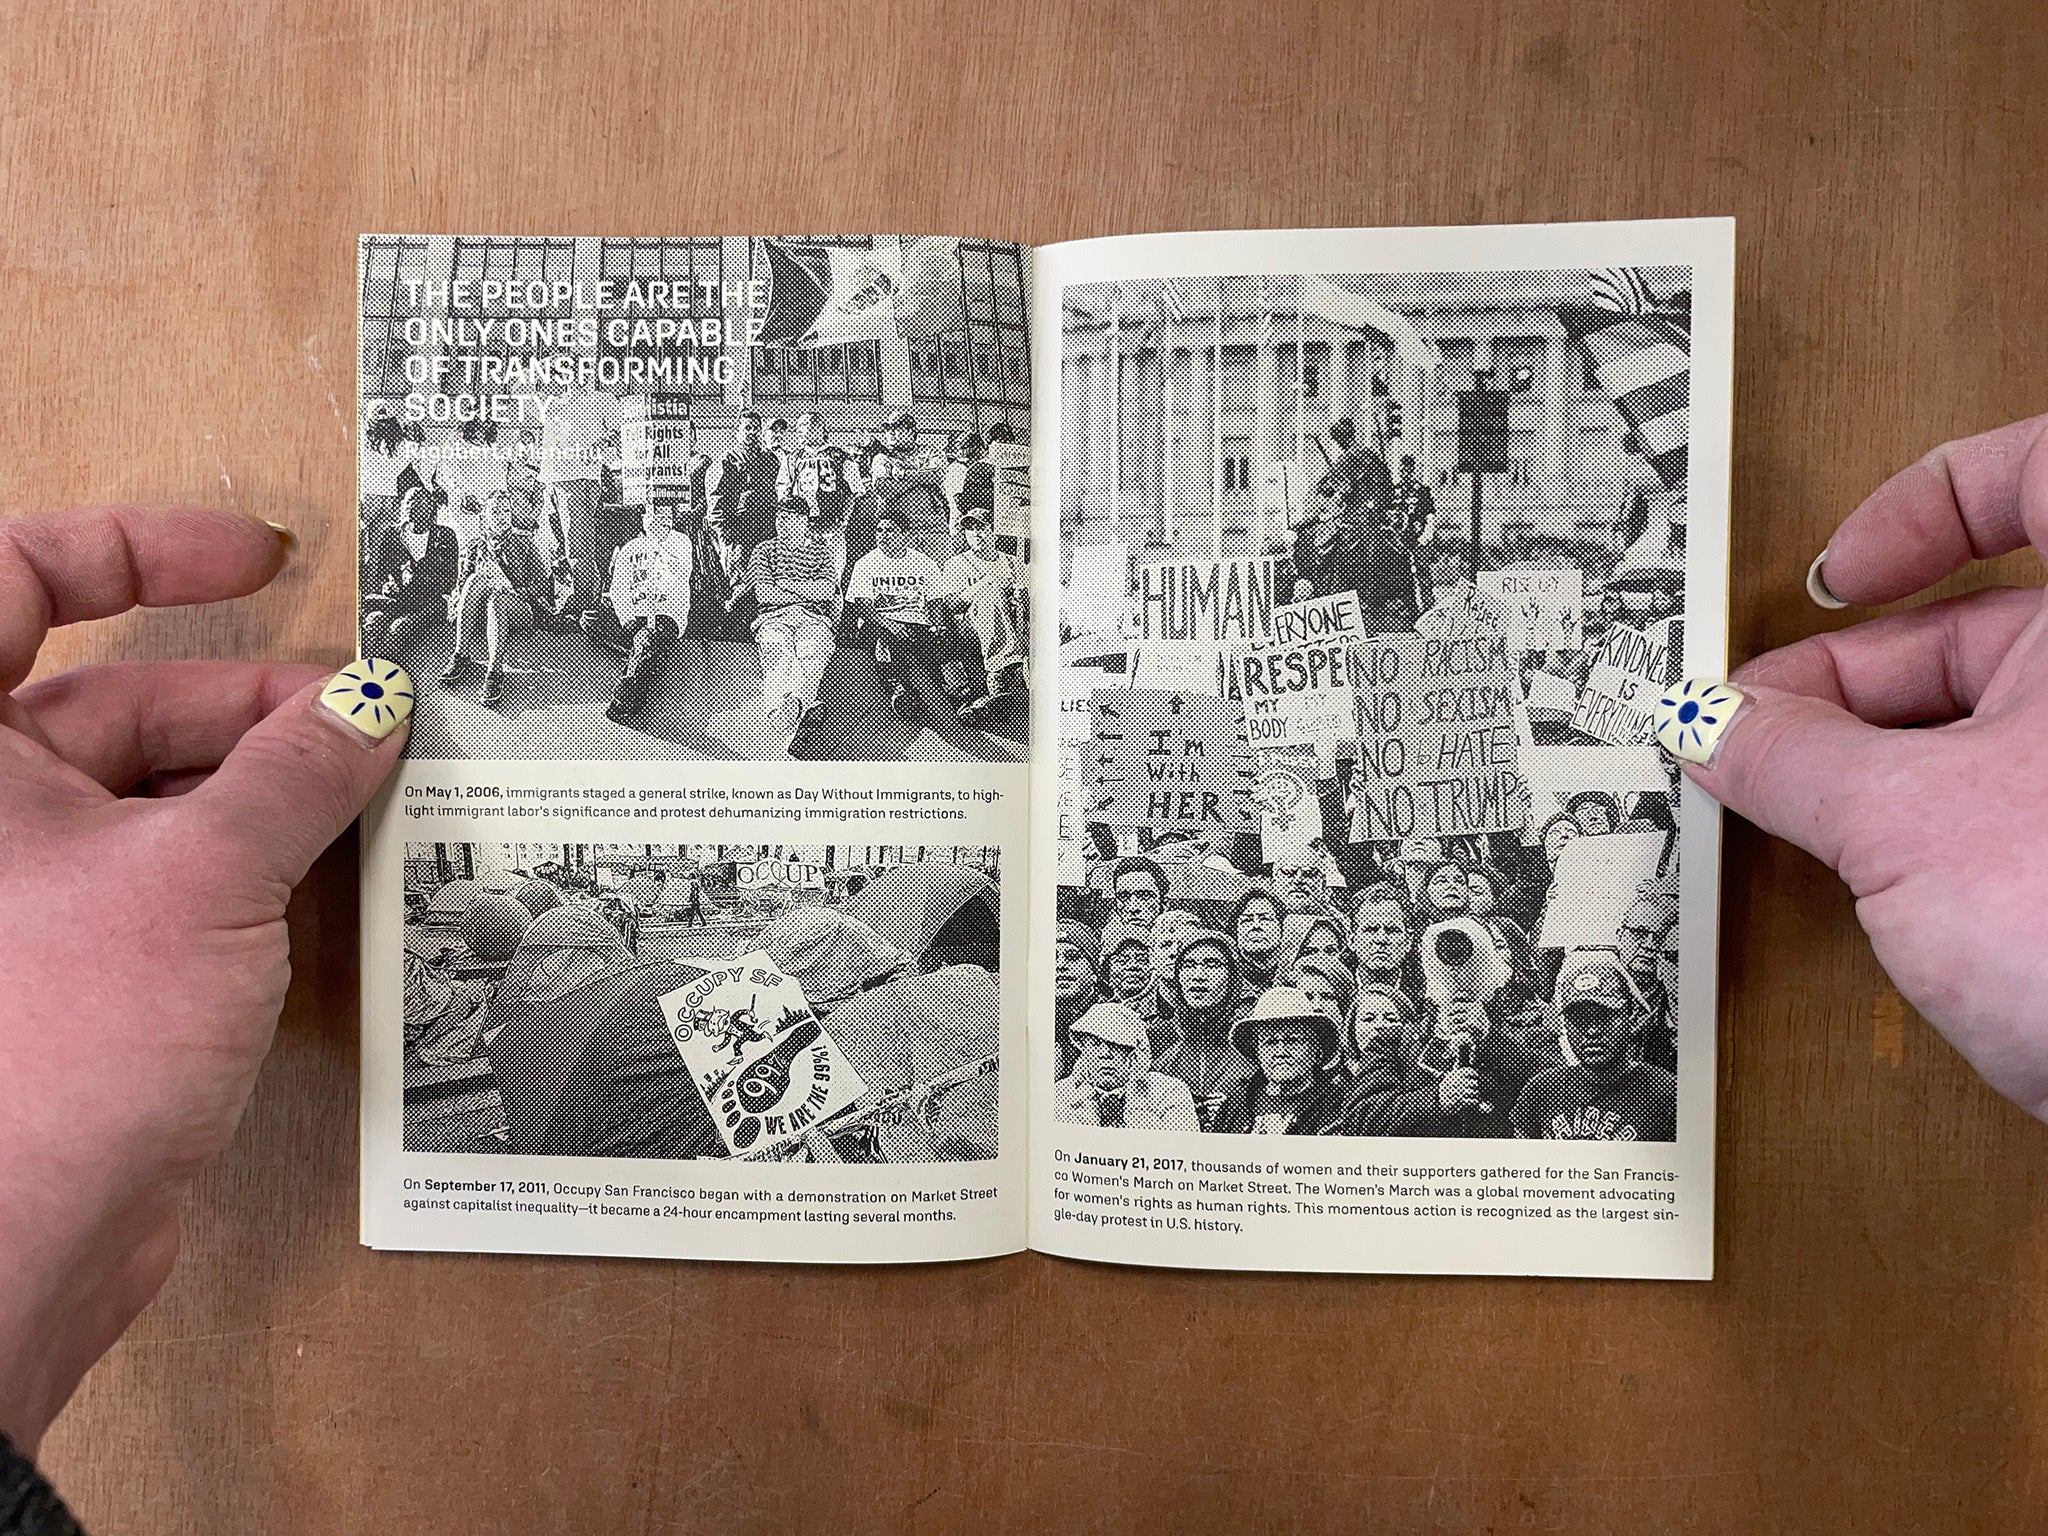 A BRIEF AND INCONCLUSIVE HISTORY OF PROTESTS ON SAN FRANCISCO’S MARKET STREET by Jessalyn Aaland